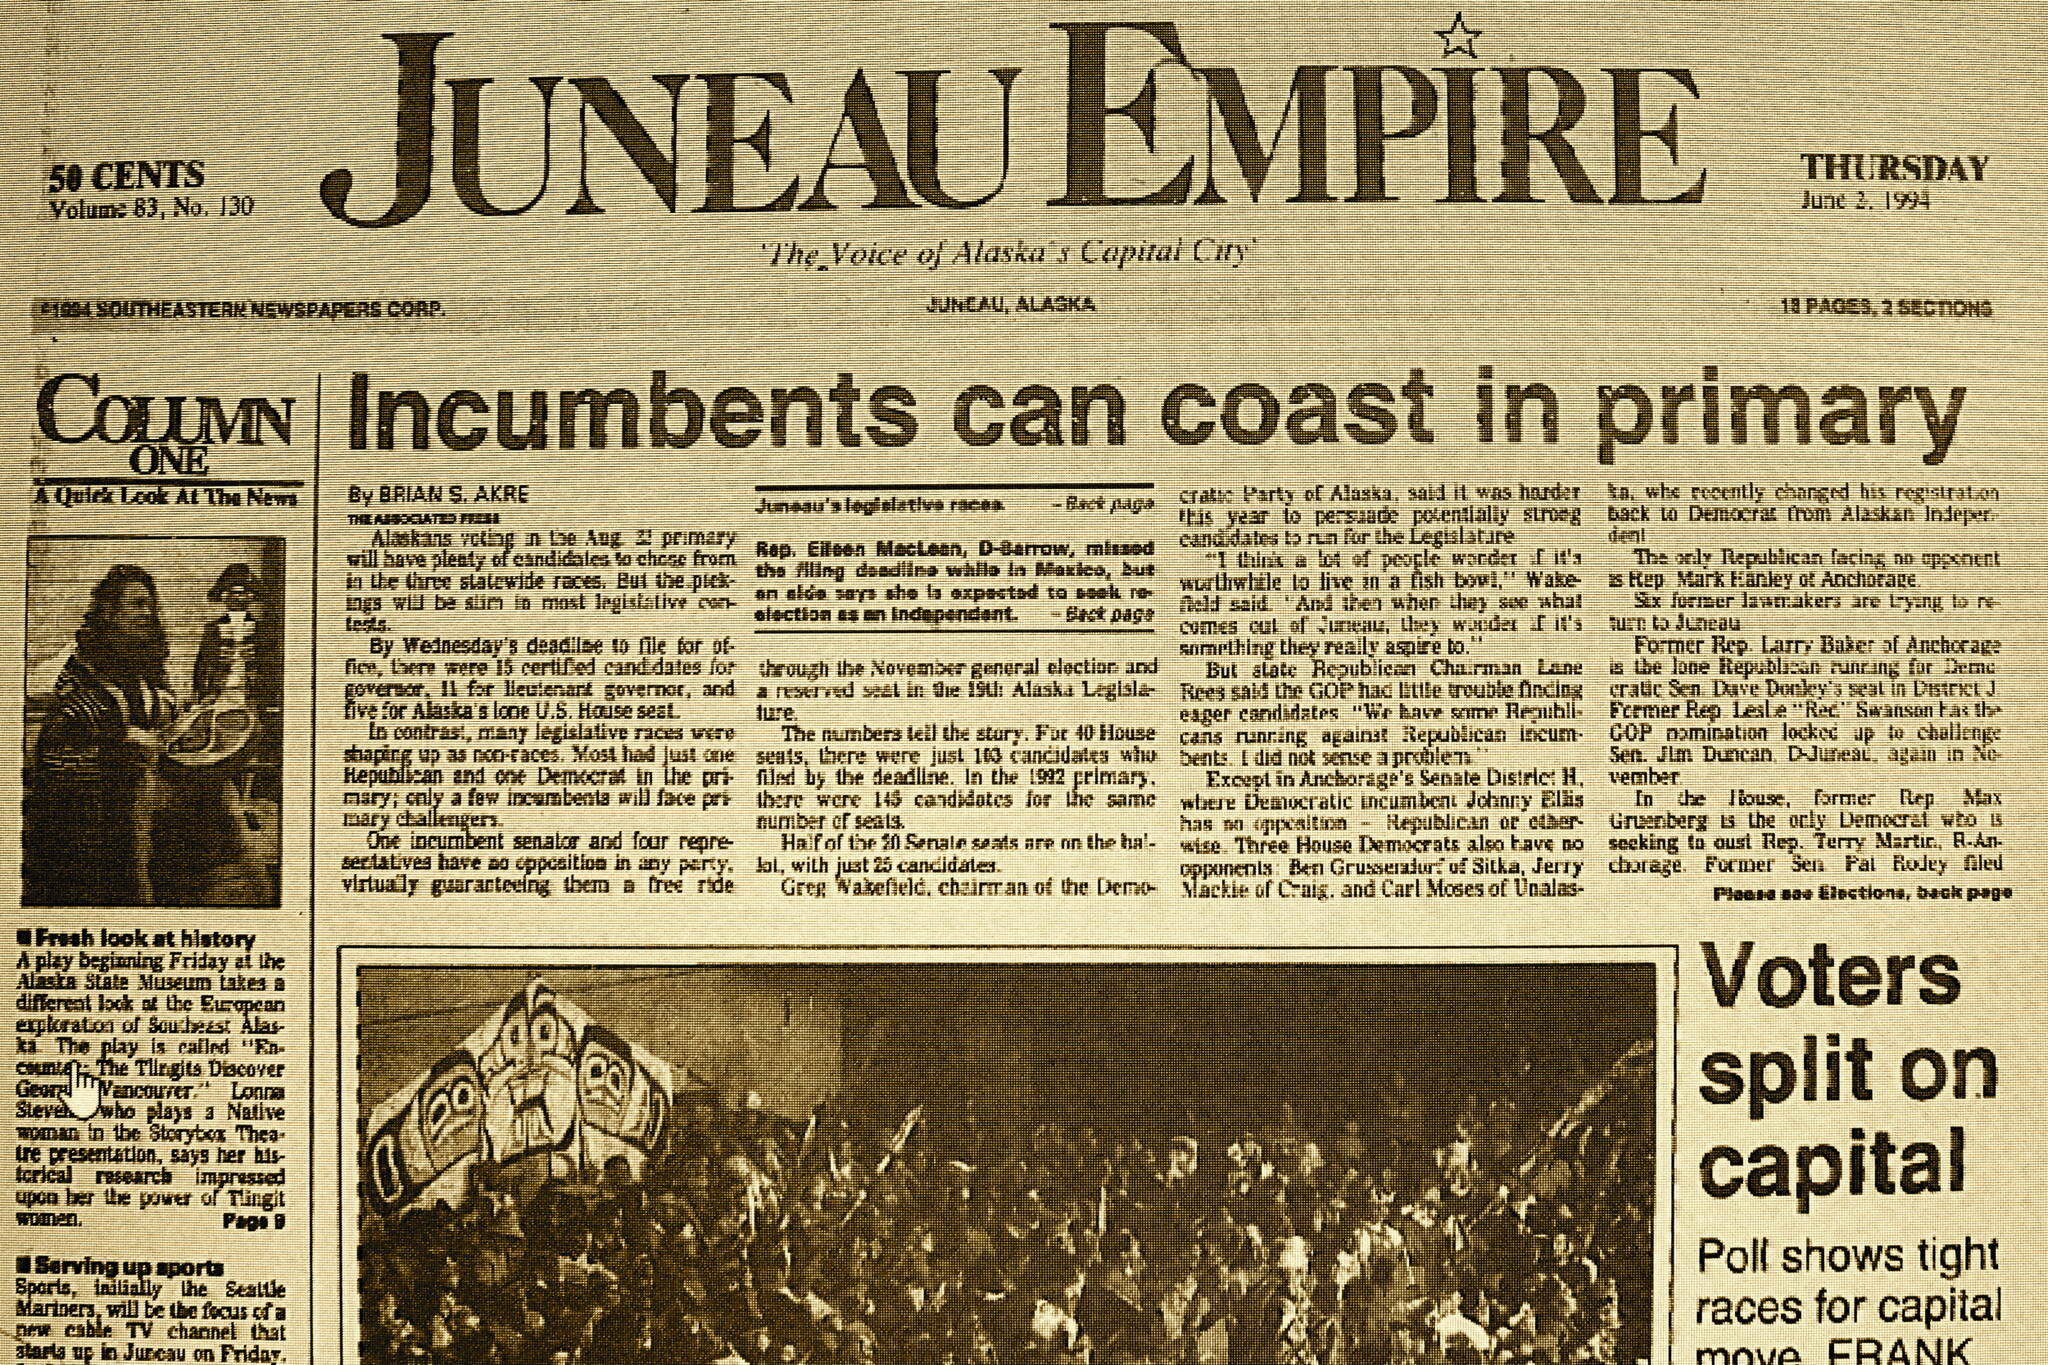 The front page of the Juneau Empire on June 2, 1994. (Mark Sabbatini / Juneau Empire)